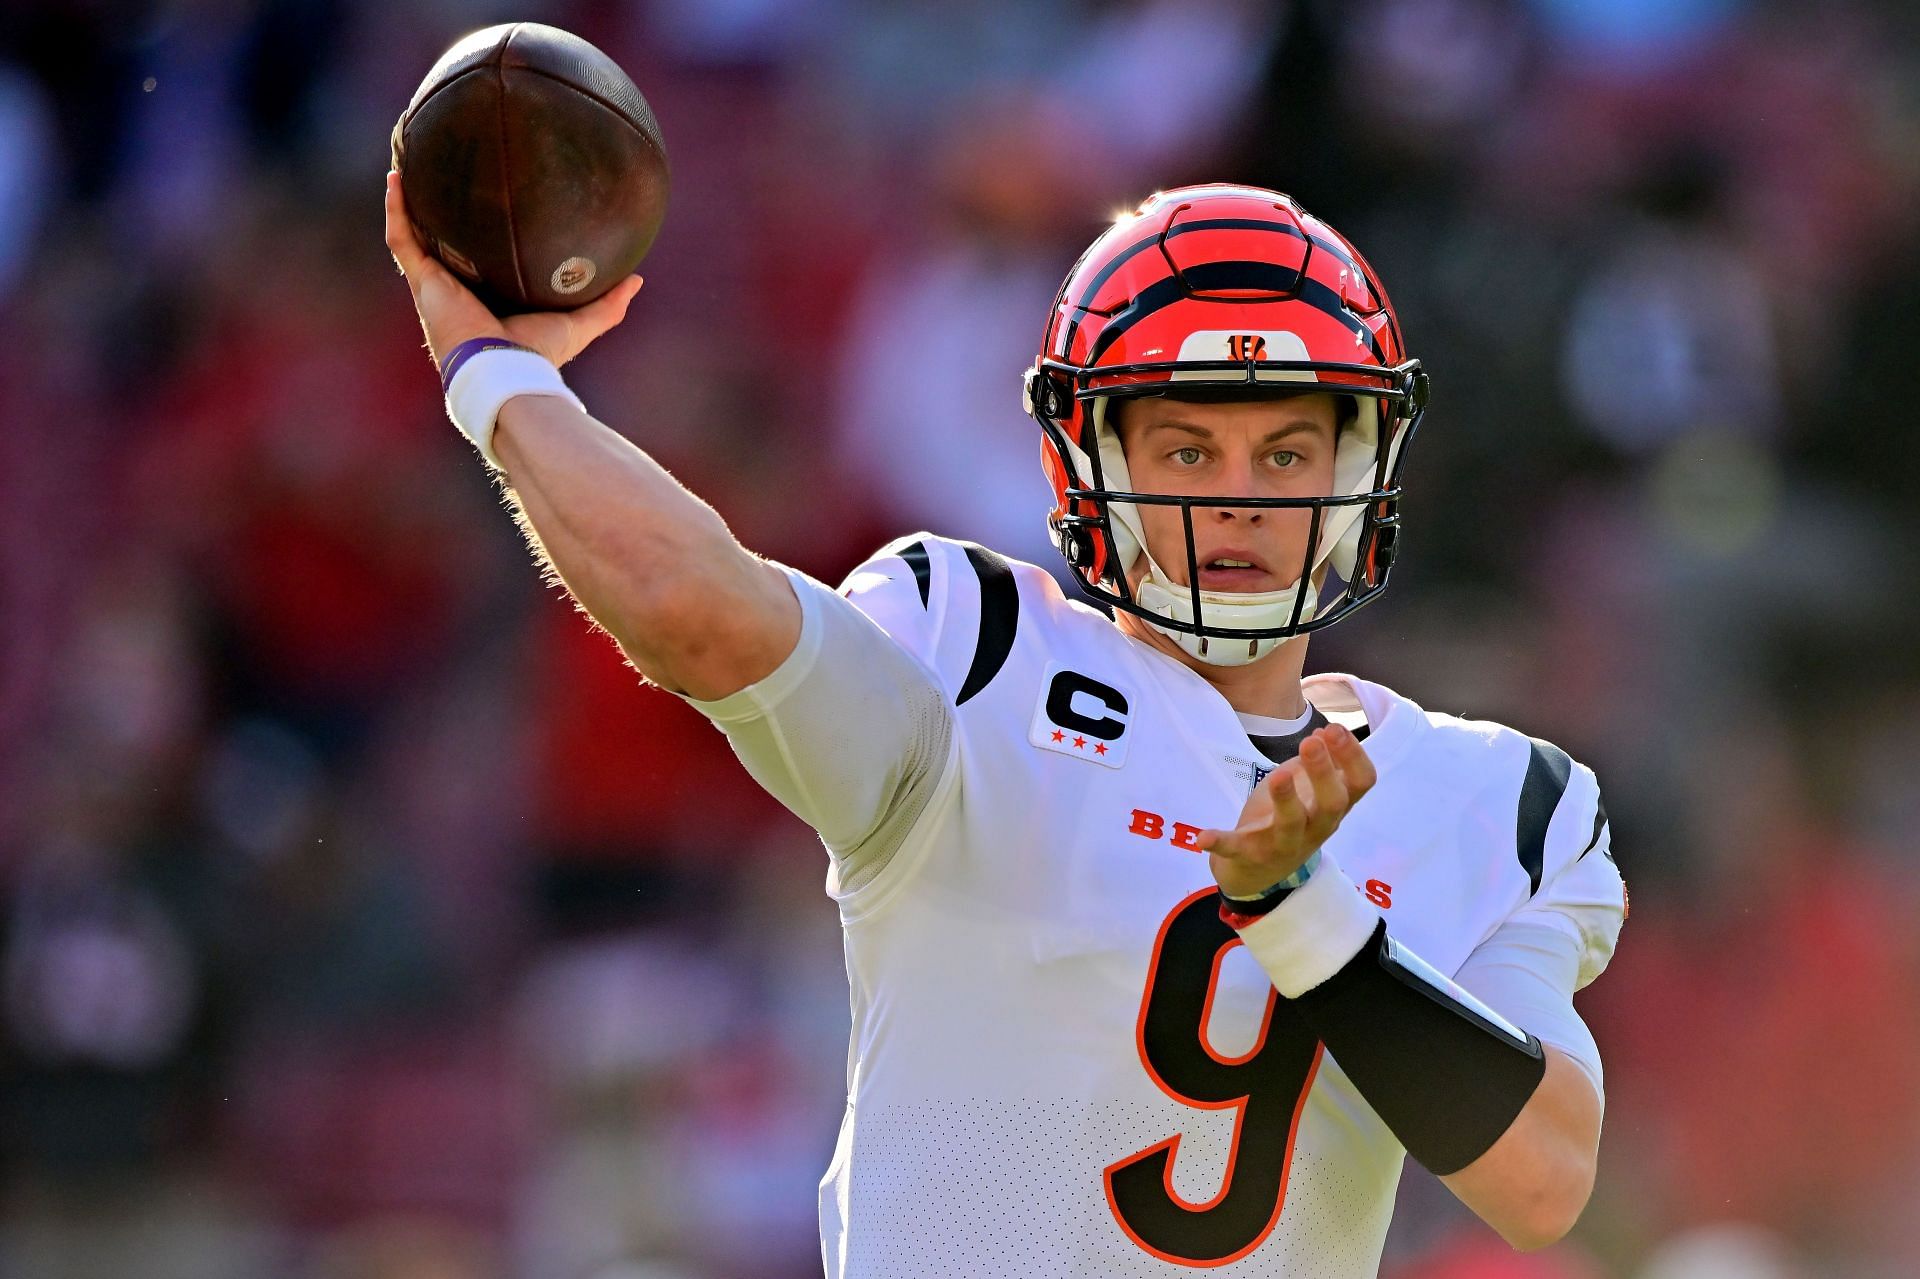 Colin Cowherd has huge praise for Joe Burrow, not so much for Bengals